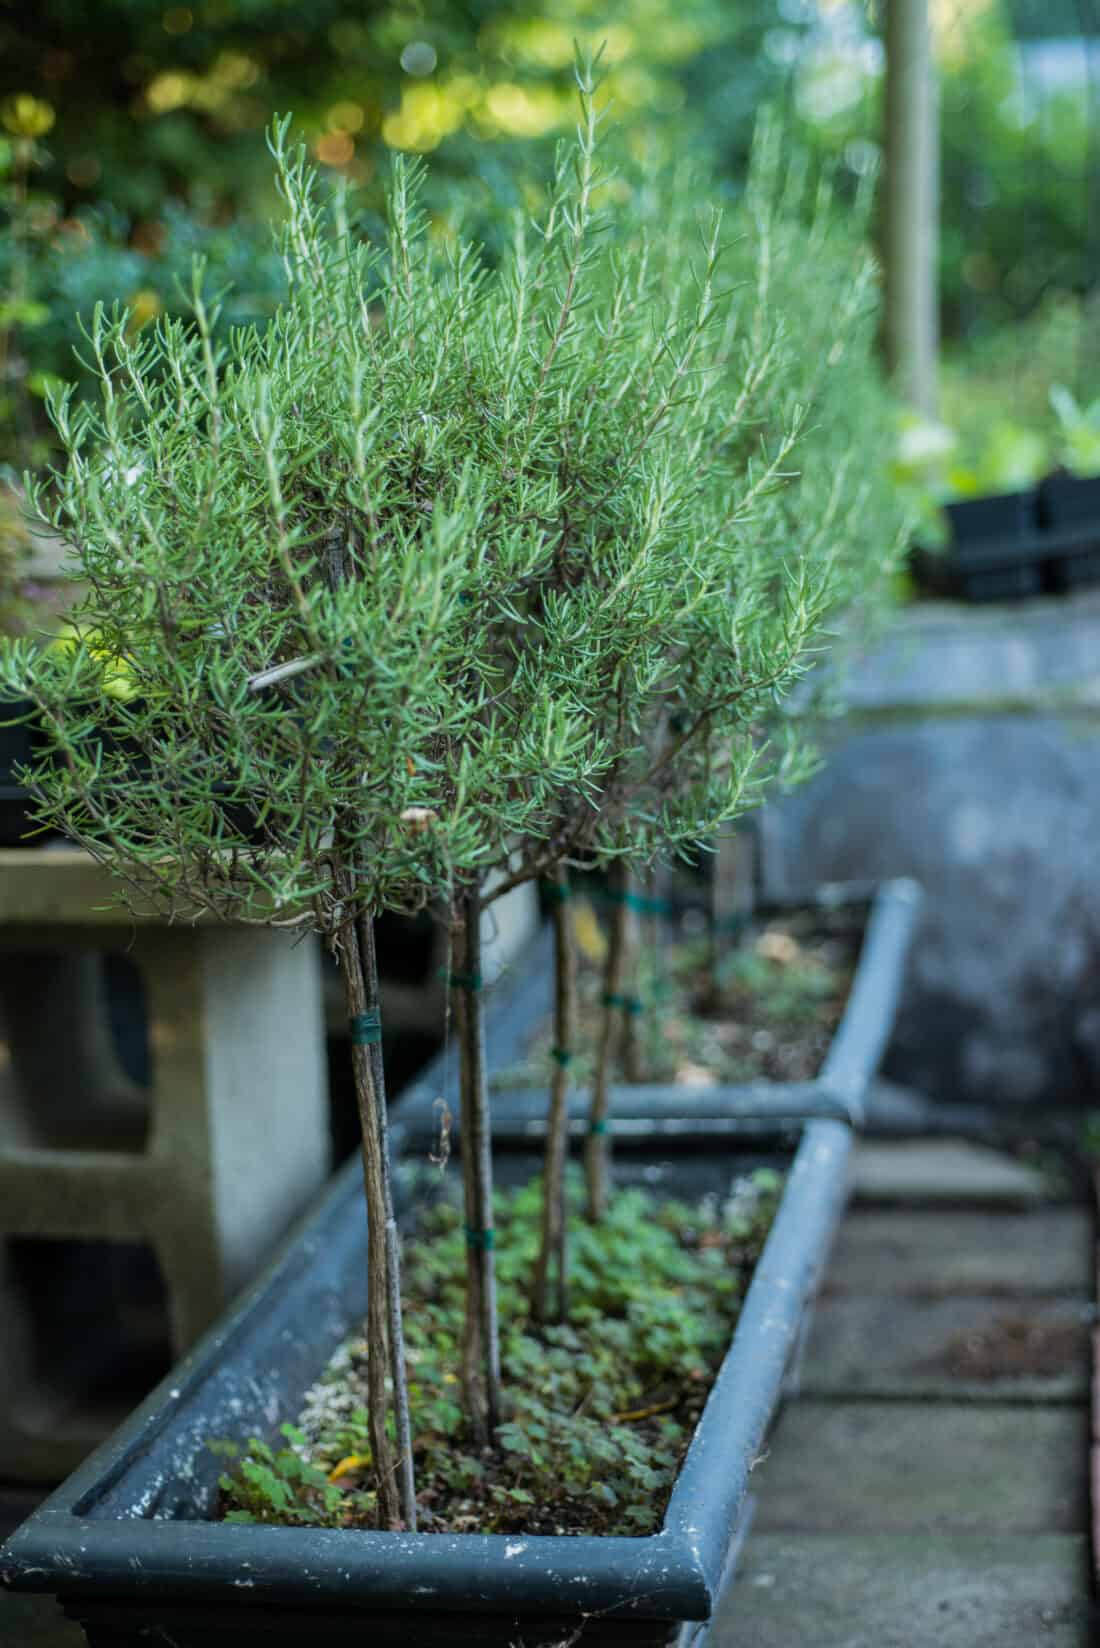 Several potted rosemary plants with dense, needle-like leaves growing in rectangular containers, set in an outdoor garden setting with soft-focused greenery in the background.